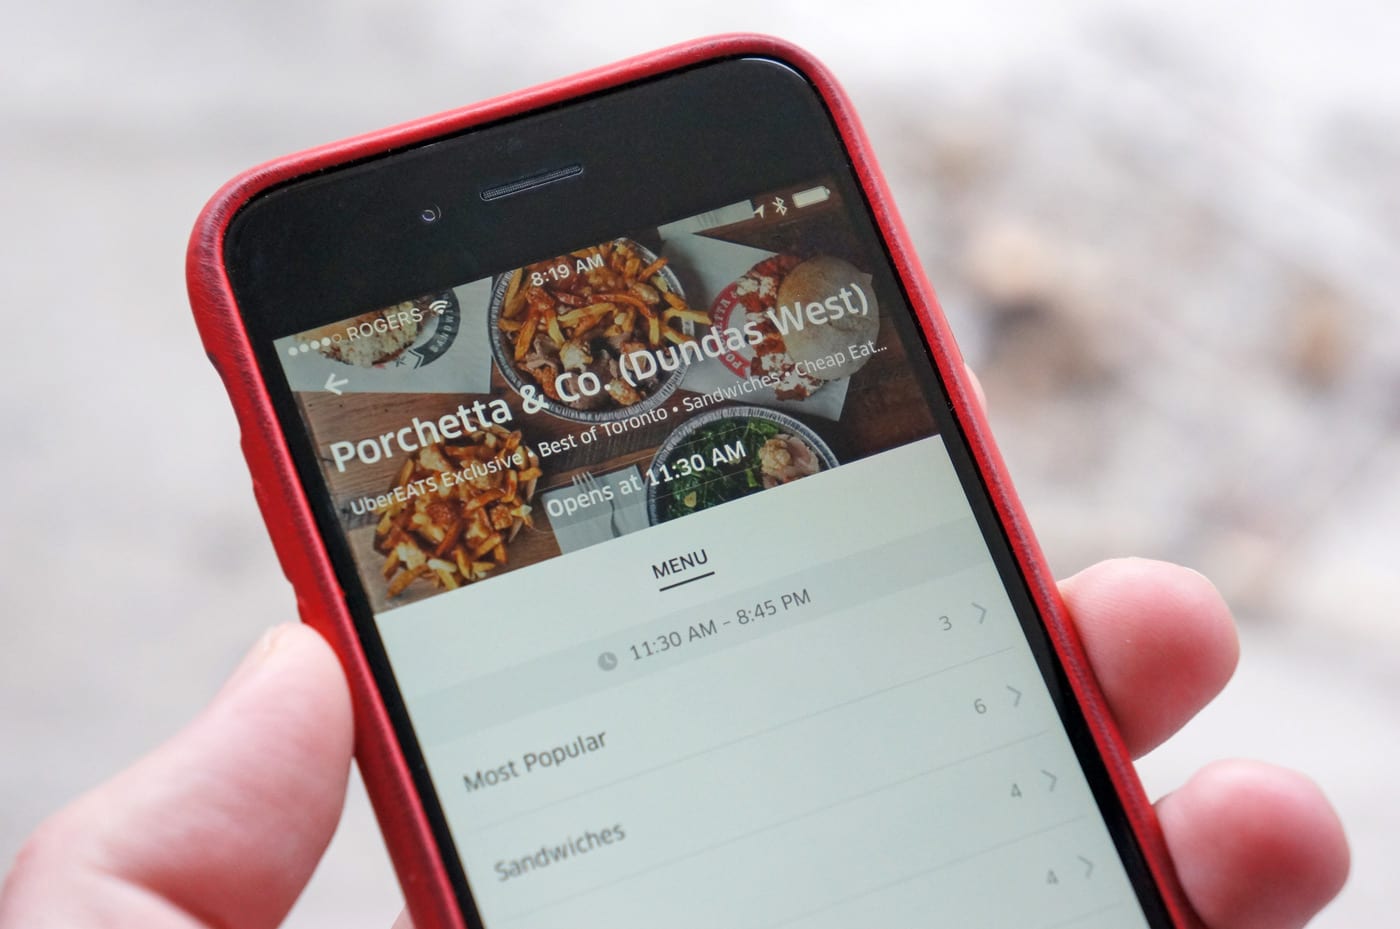 UberEats is coming to 10 more towns